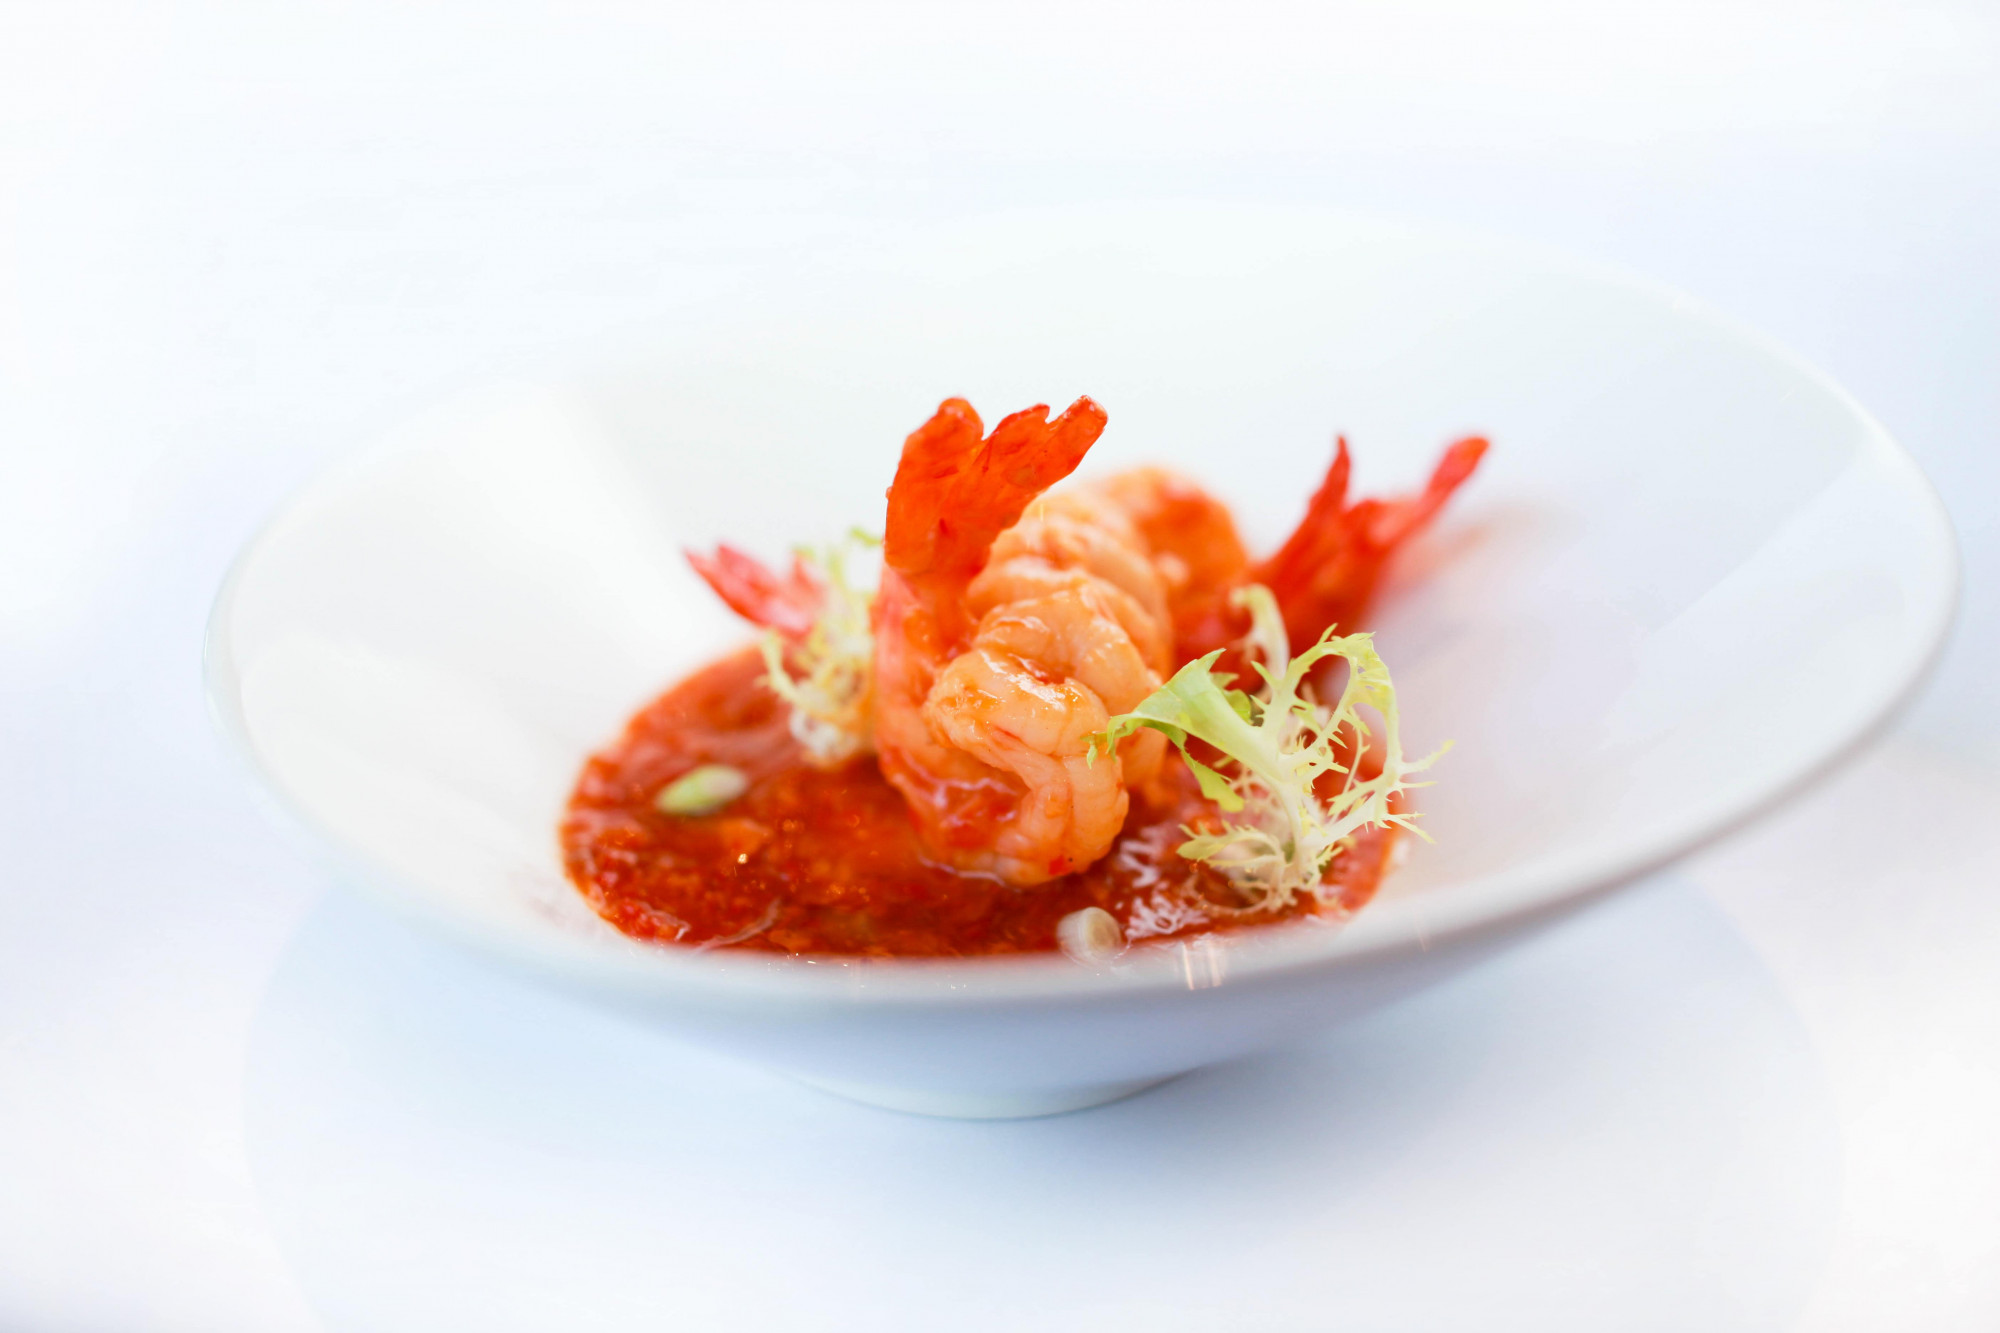 Sauteed Prawn with Chili Sauce in Singapore Style min